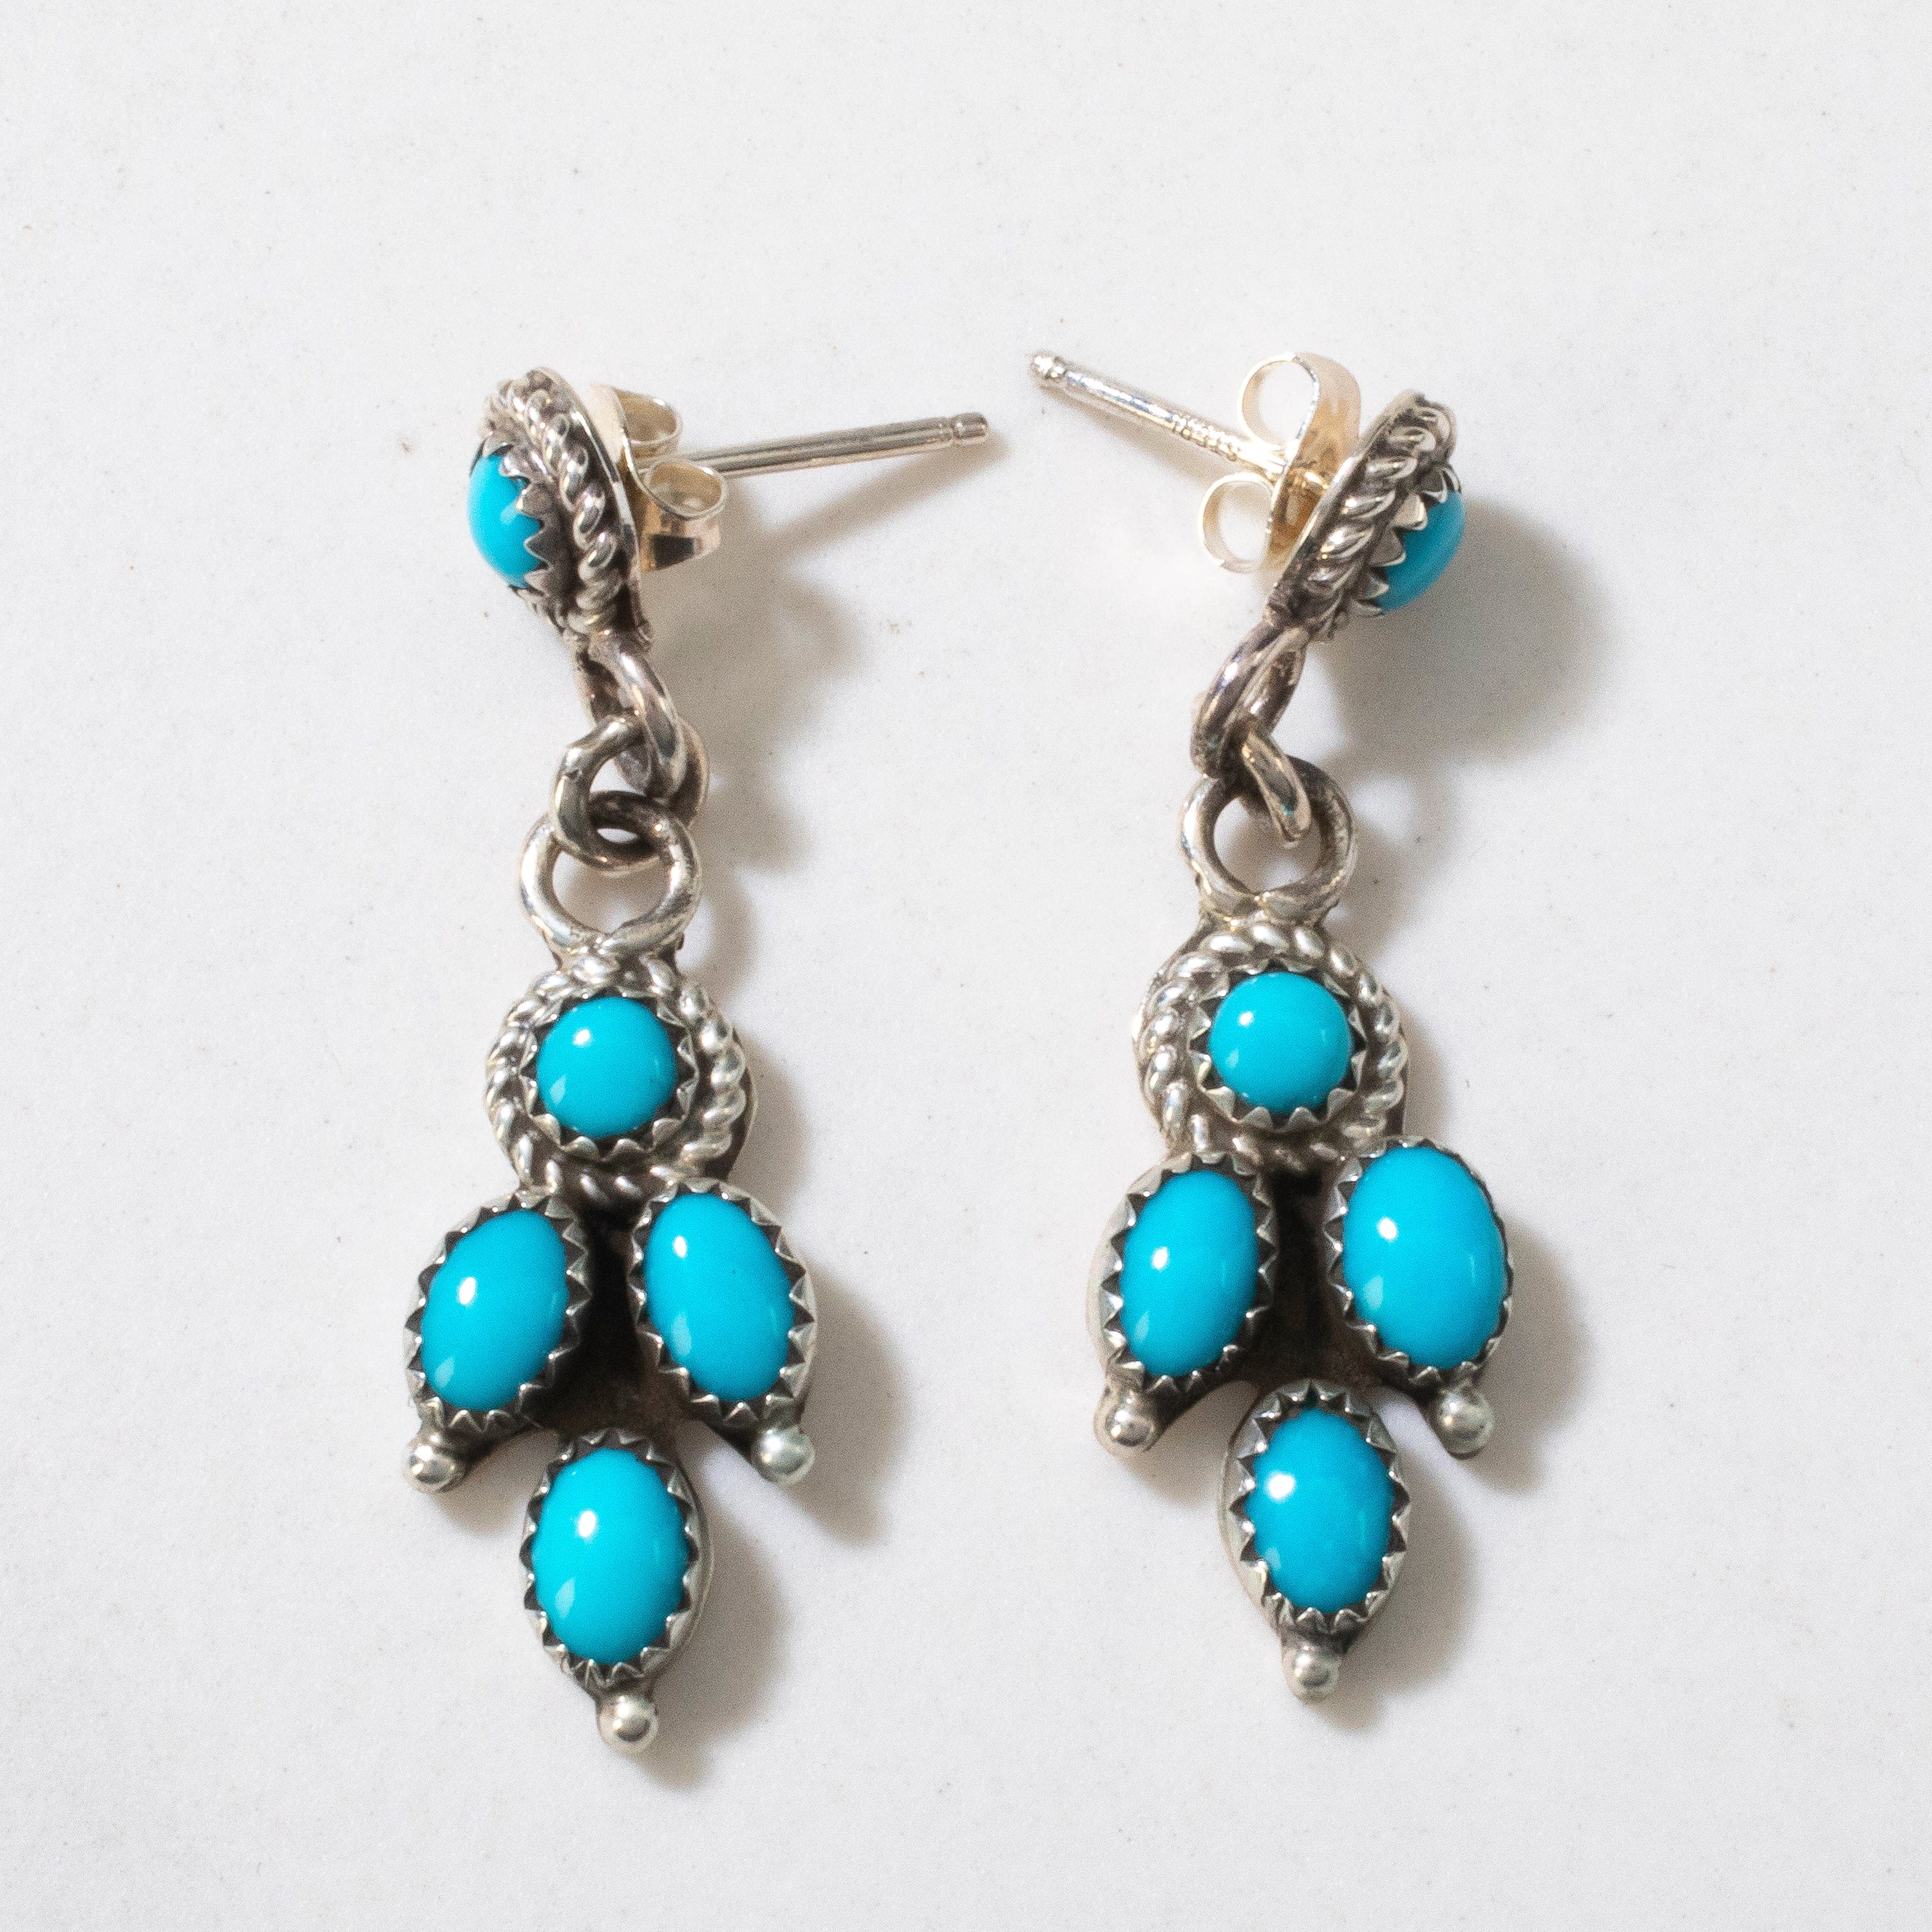 Kalifano Native American Jewelry Sleeping Beauty Turquoise Dangle Navajo USA Native American Made 925 Sterling Silver Earrings with Stud Backing NAE300.021